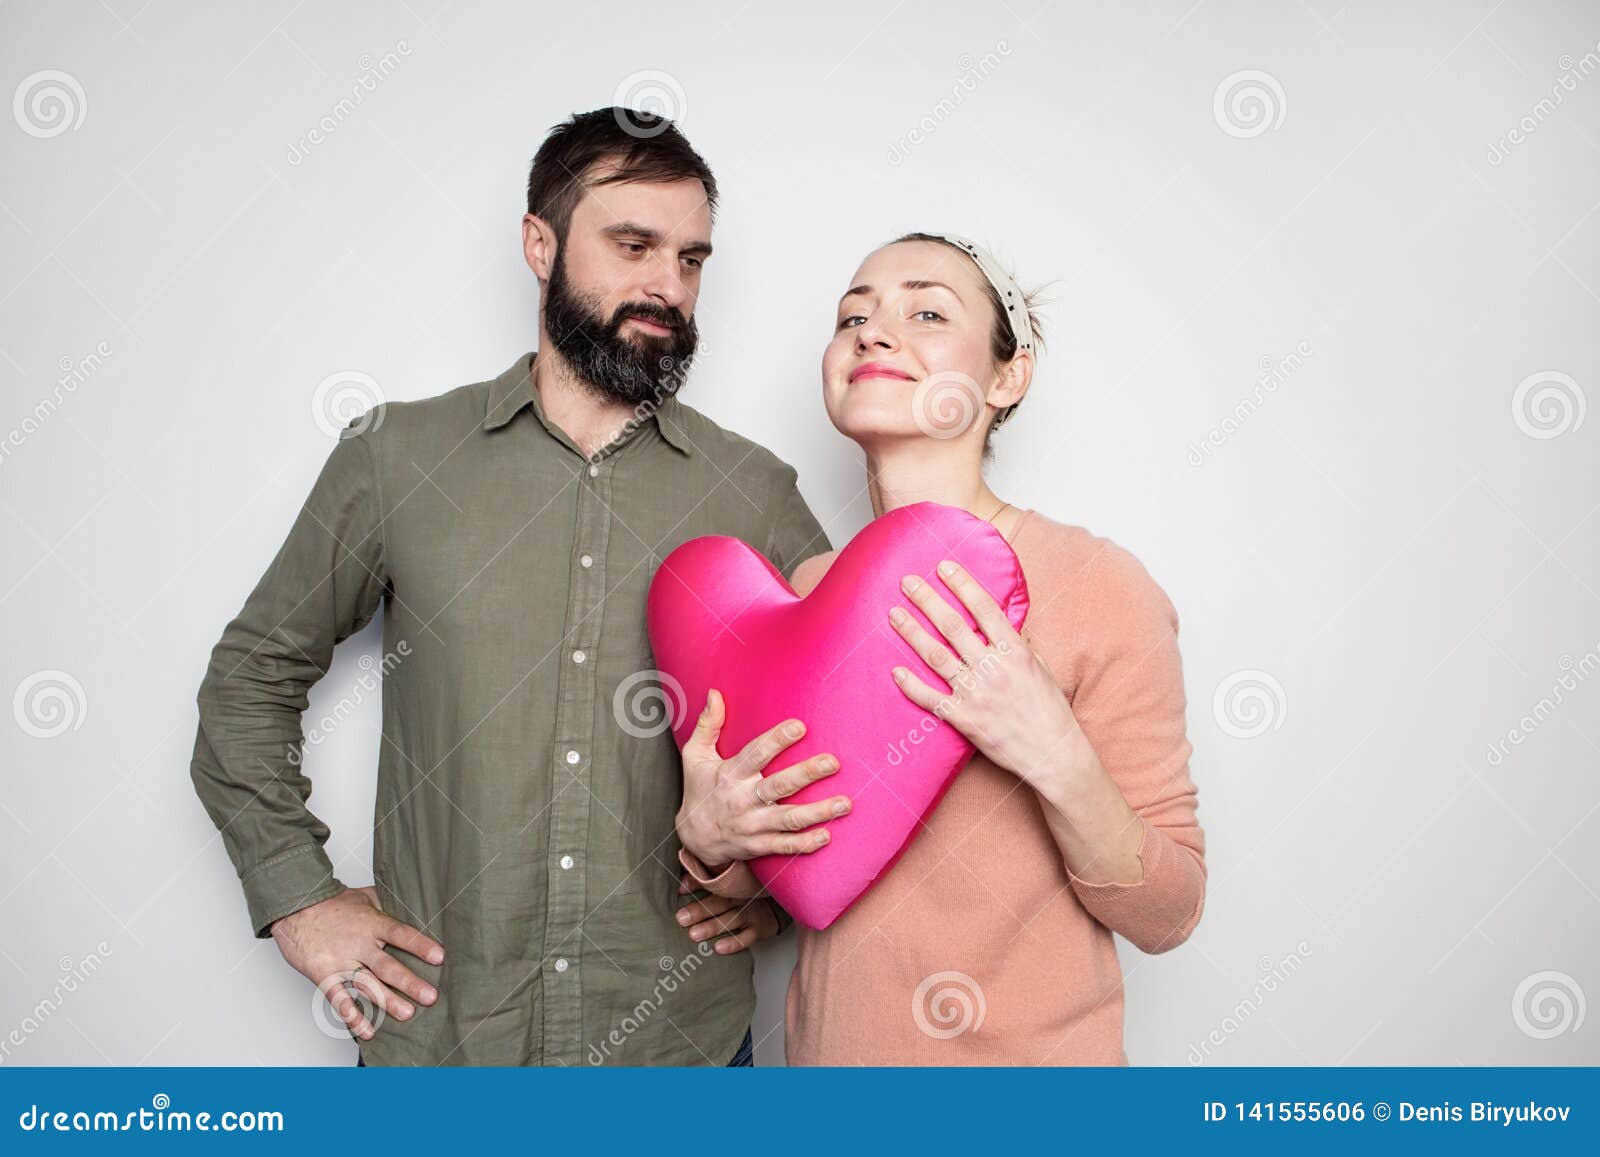 Bearded Man And Young Girl Play With Red Soft Toy Heart Couple In